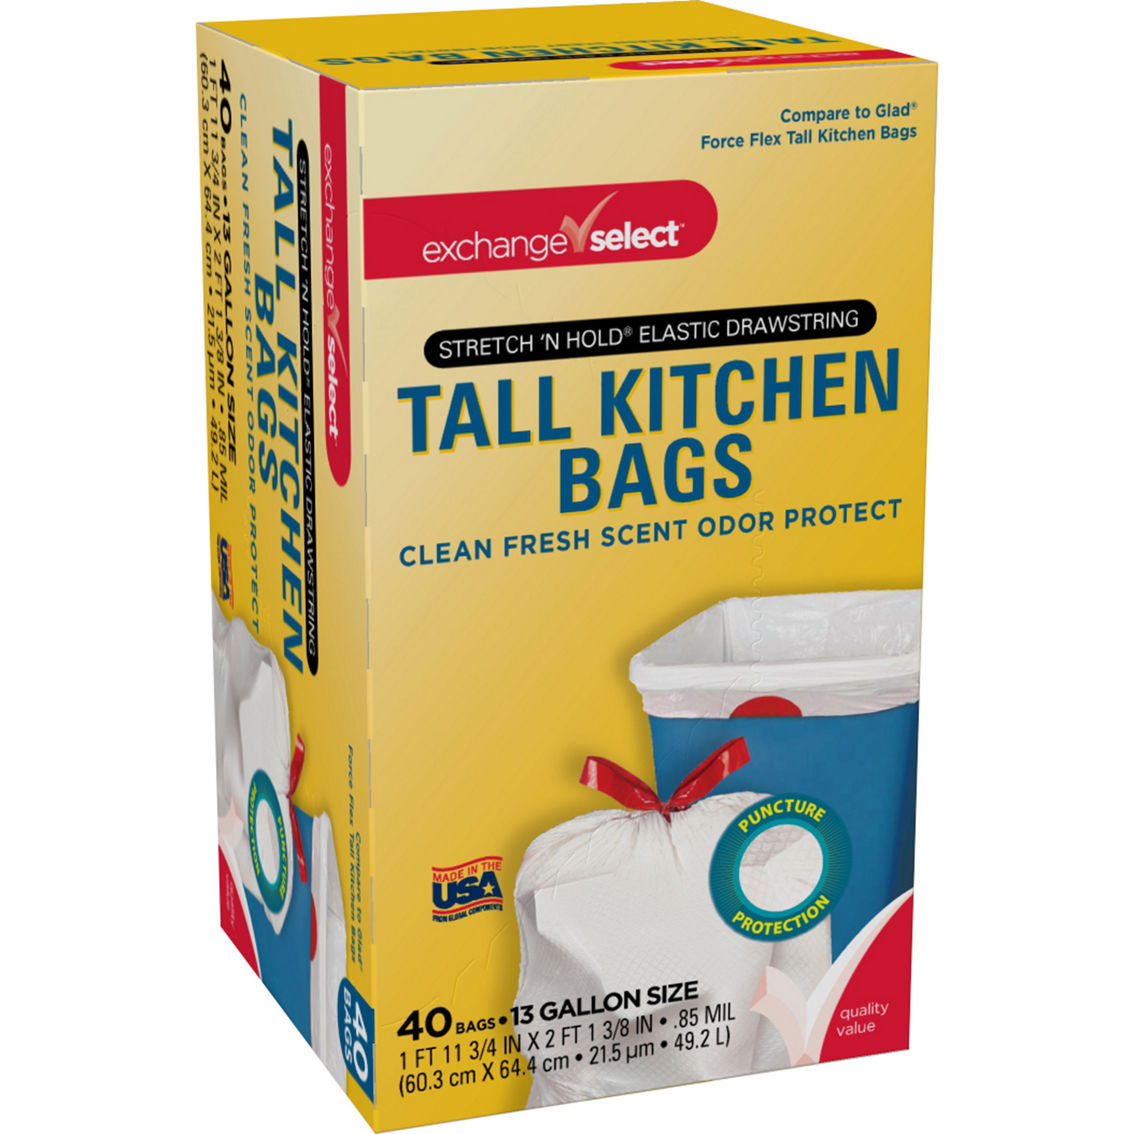 Exchange Select 13 gal. Tall Kitchen Stretch 'N Hold Elastic Drawstring Trash Bags - Image 3 of 3